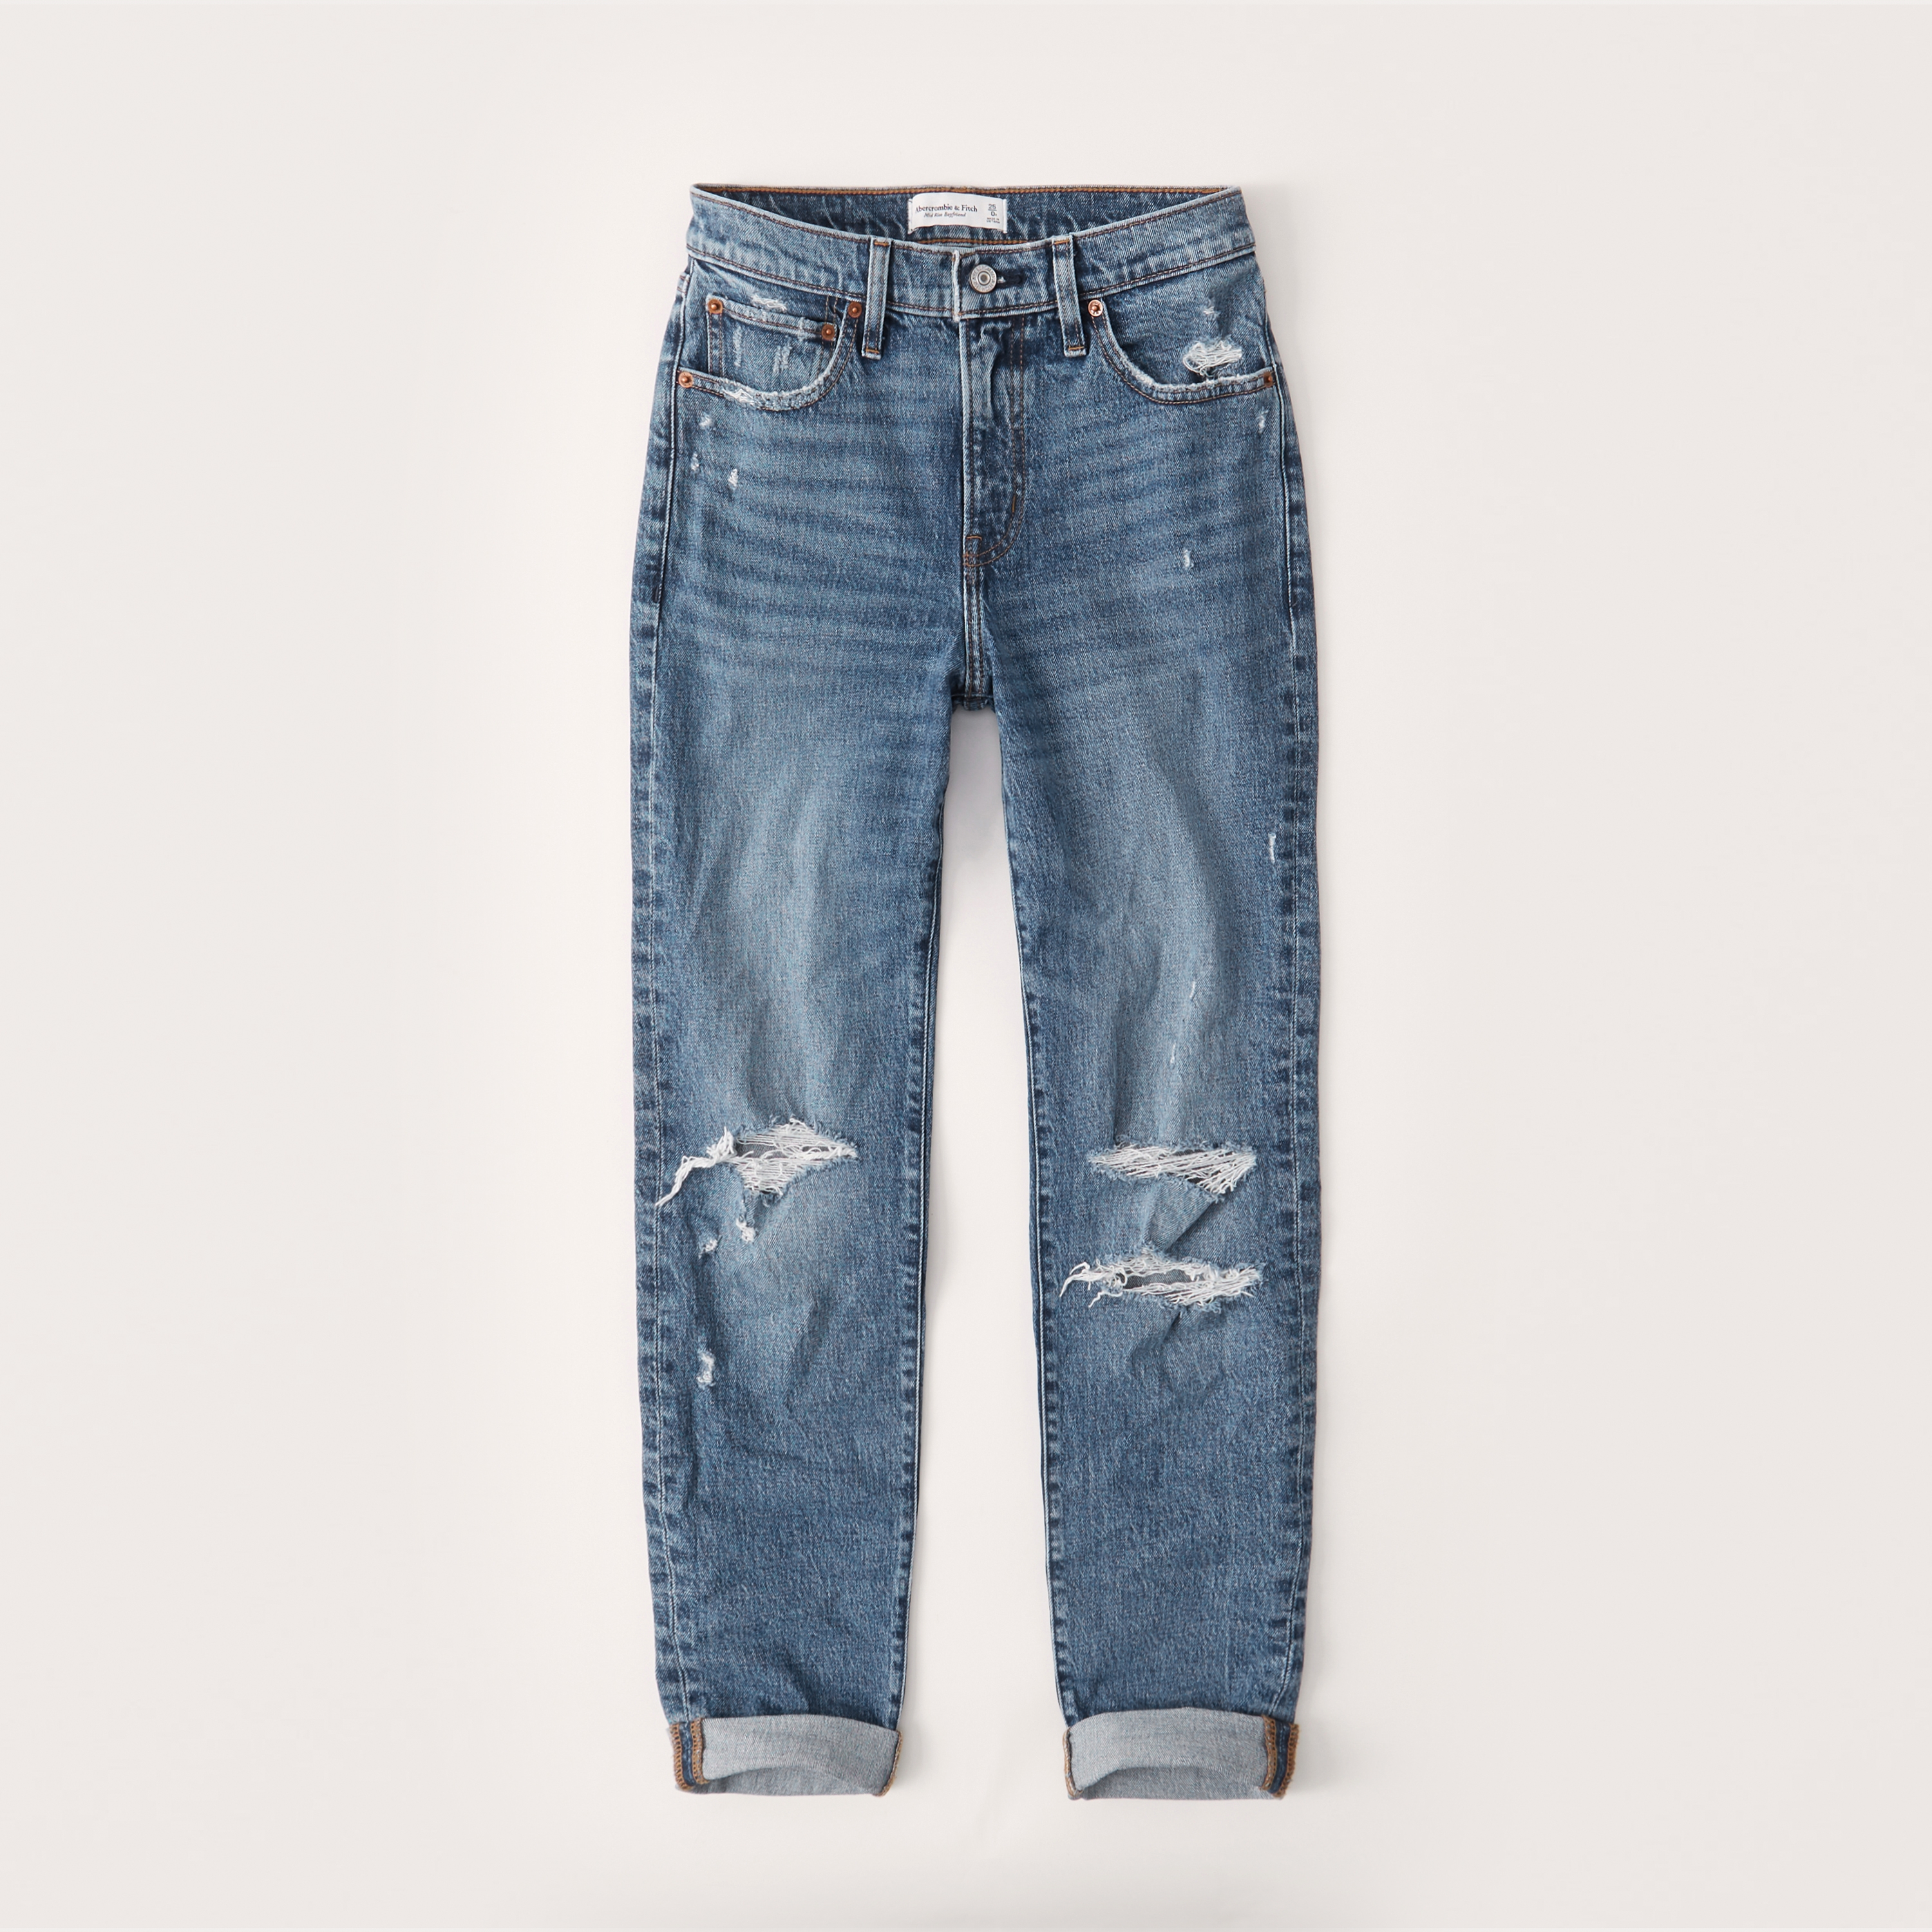 abercrombie & fitch low rise jeans